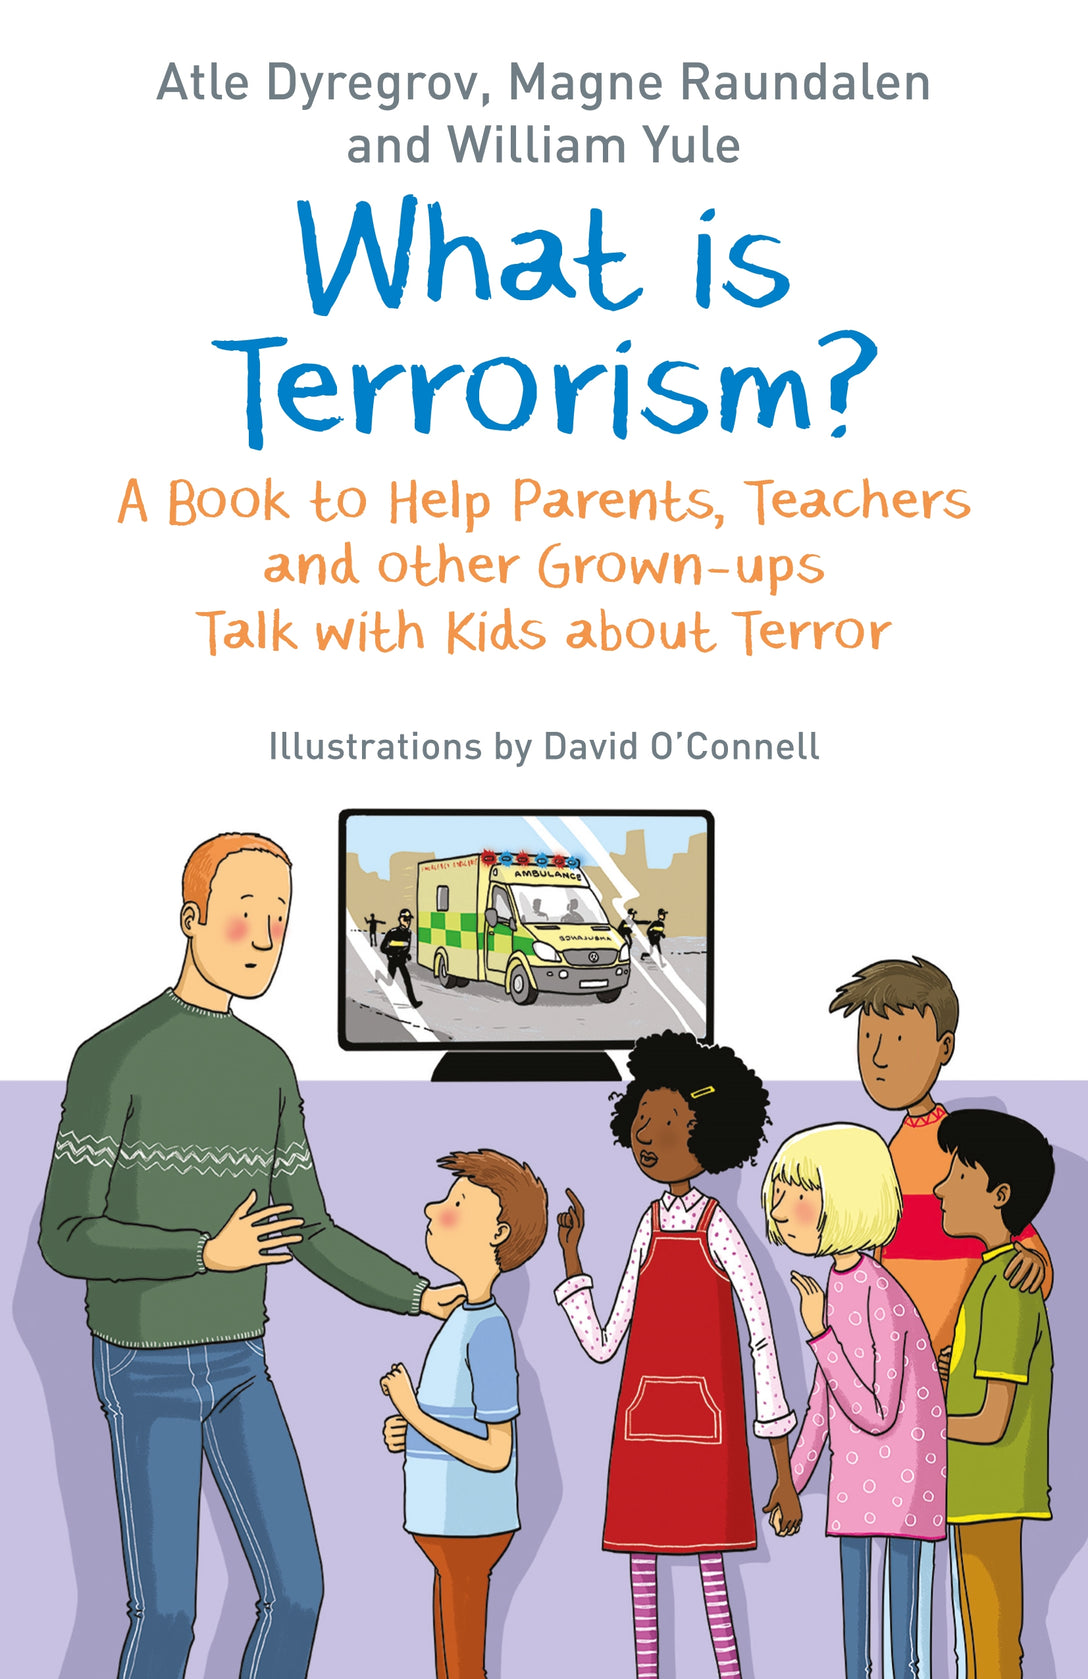 What is Terrorism? by Atle Dyregrov, William Yule, Magne Raundalen